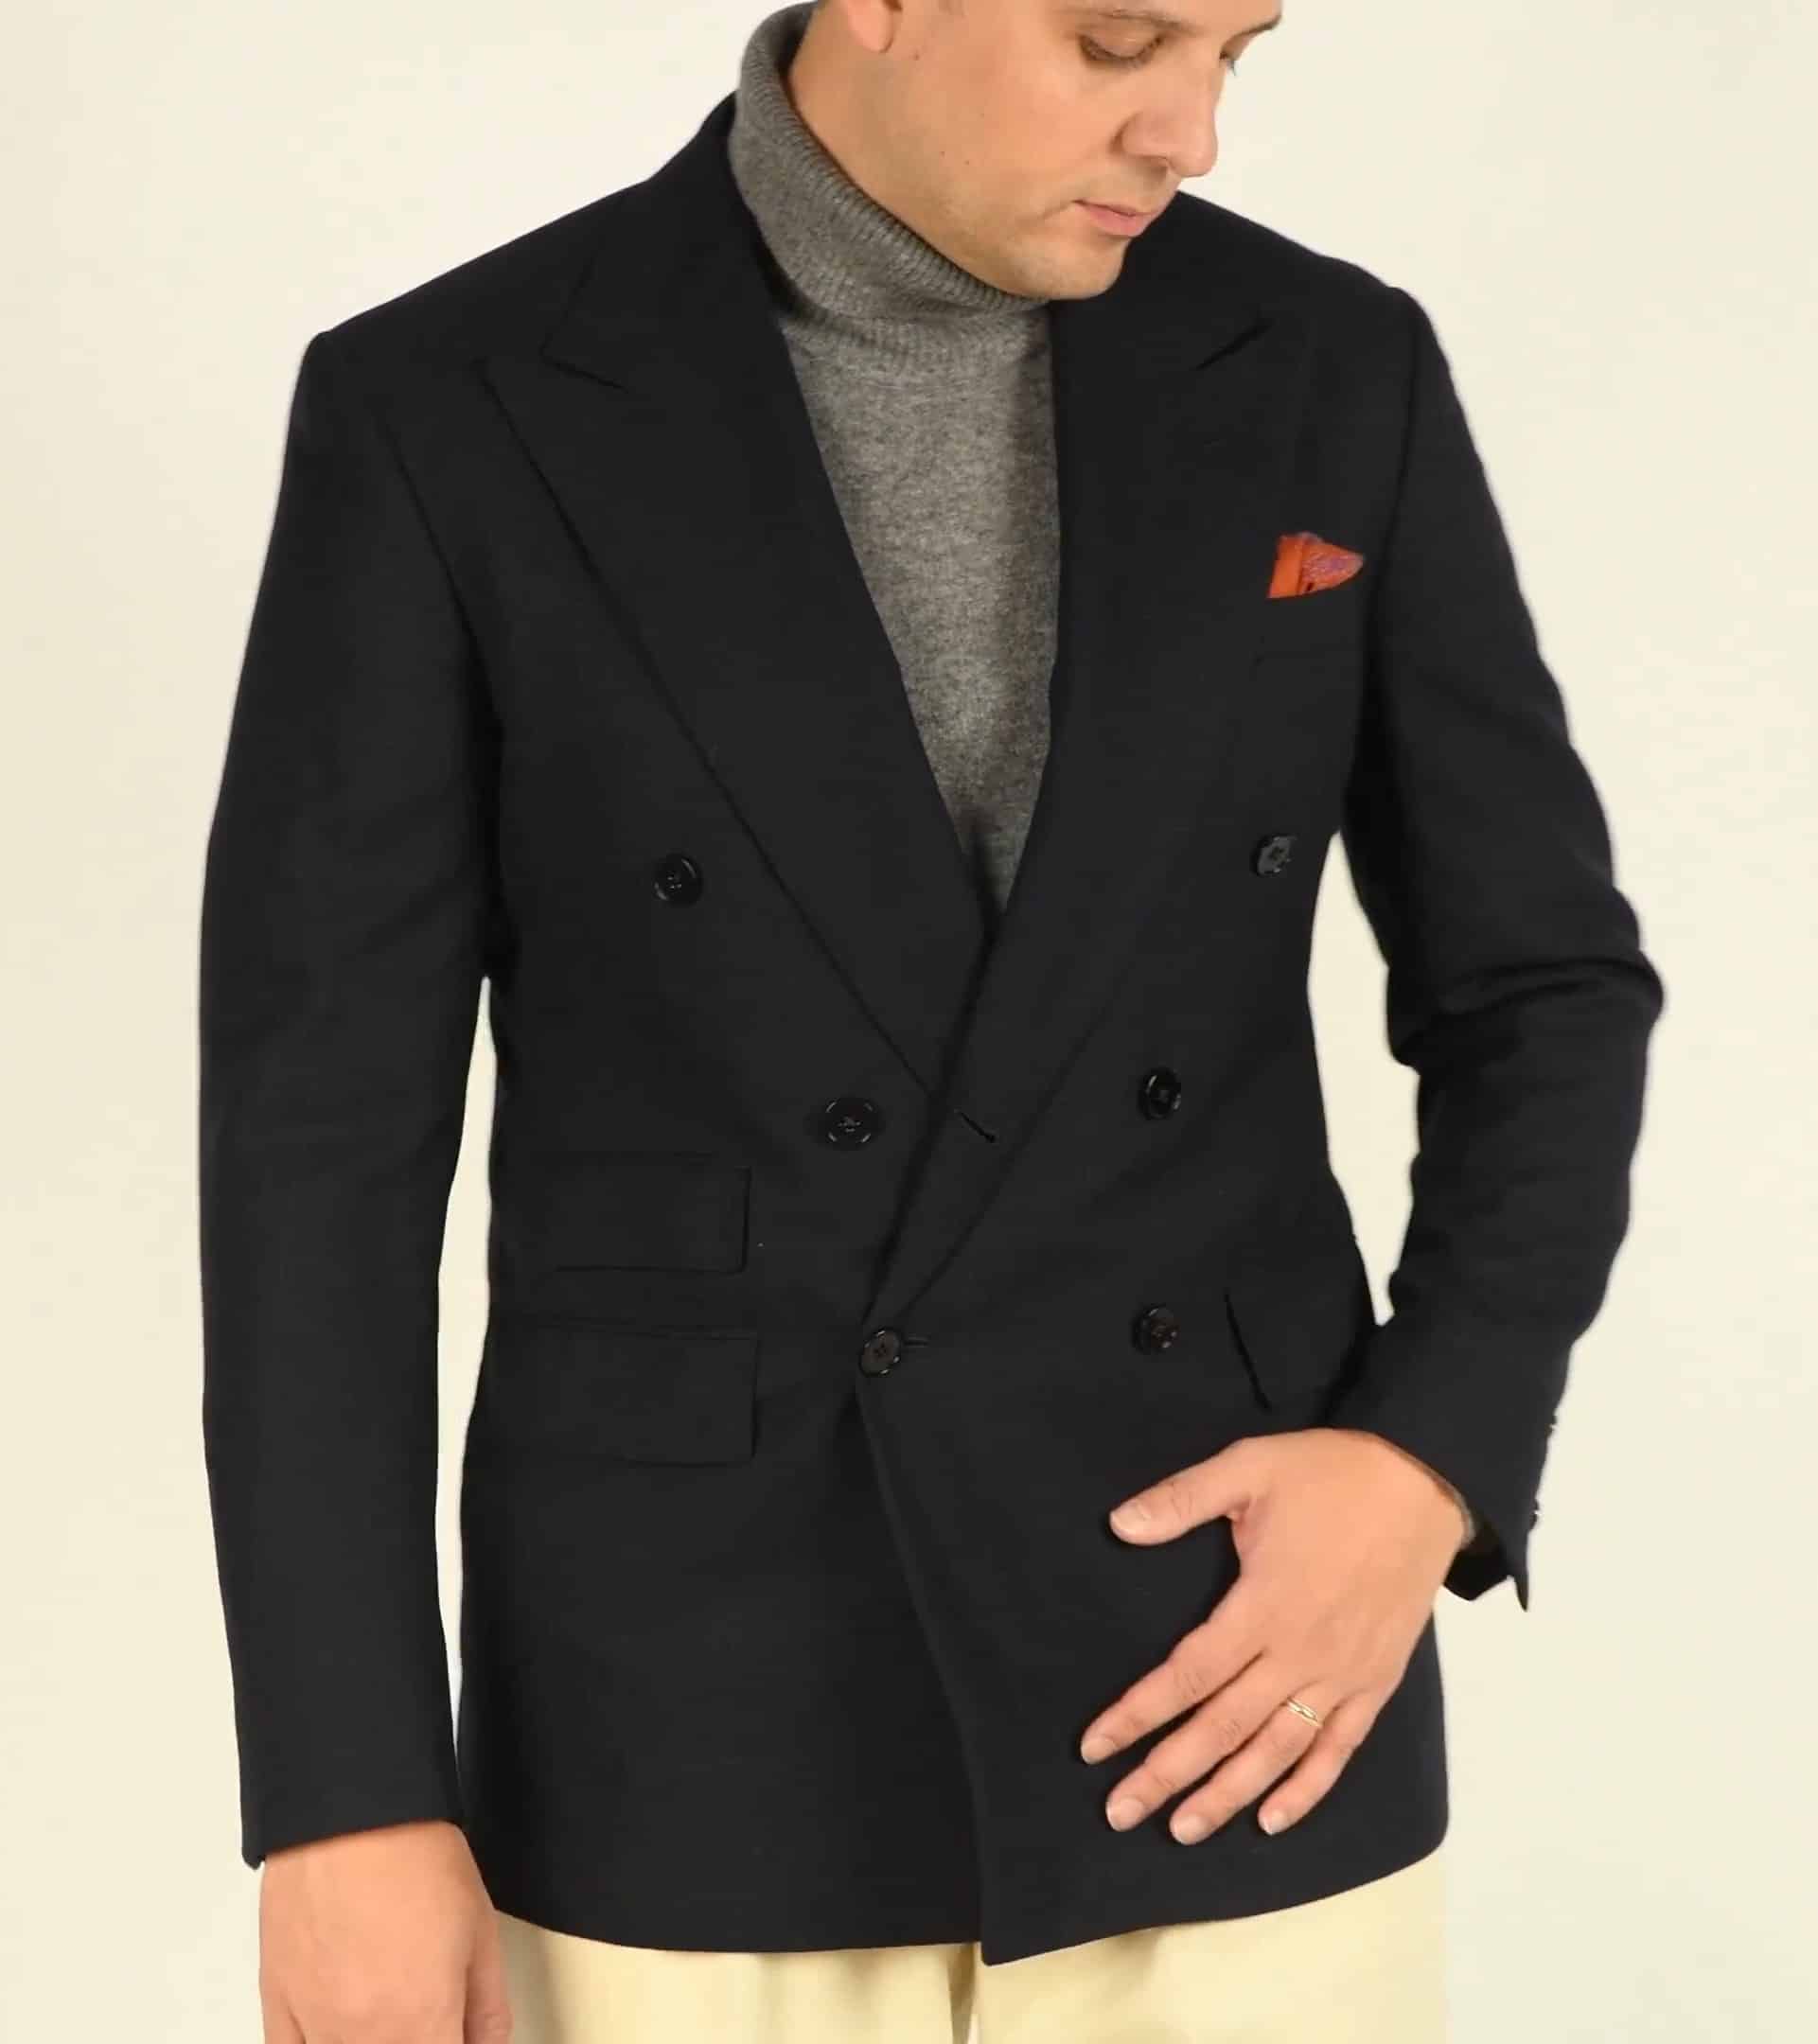 A navy jacket is a menswear staple that works wonderfully with a turtleneck